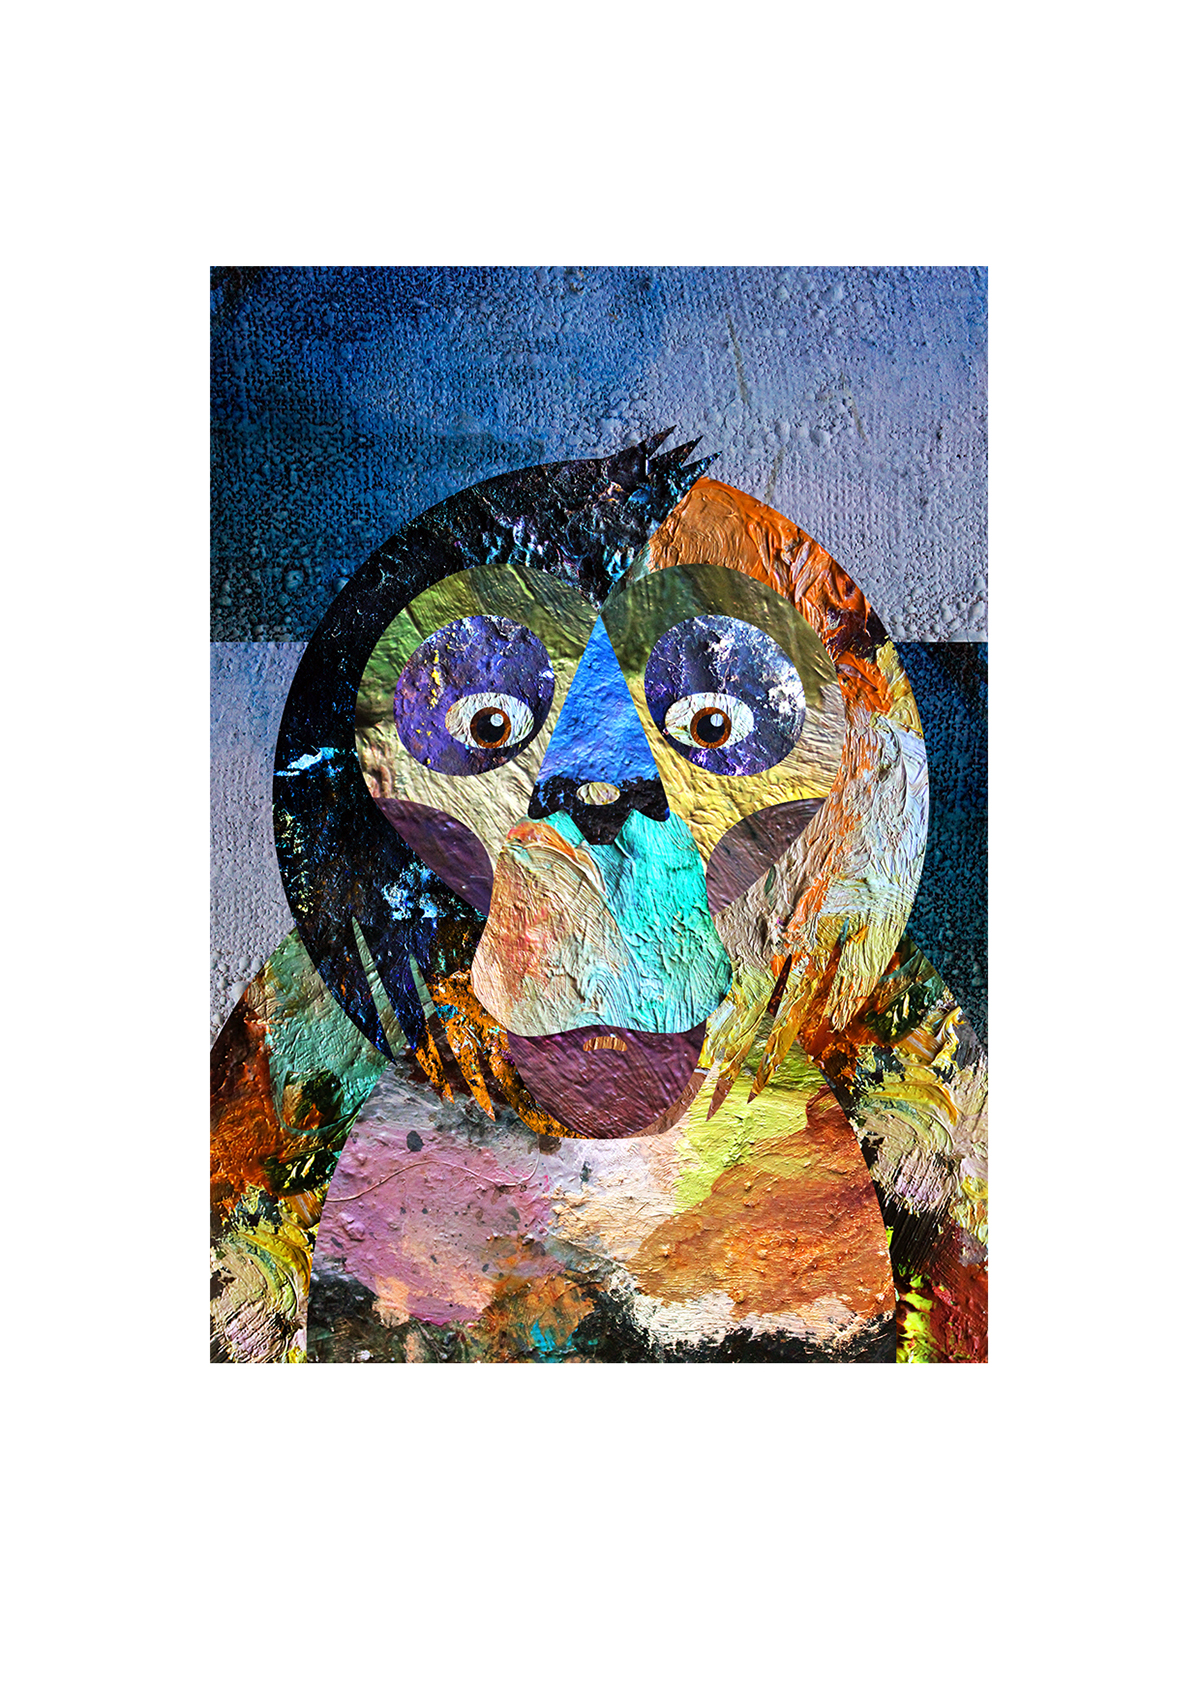 #illustration #newyear #monkey #card #postcard   #graphic #paint   #Watercolor